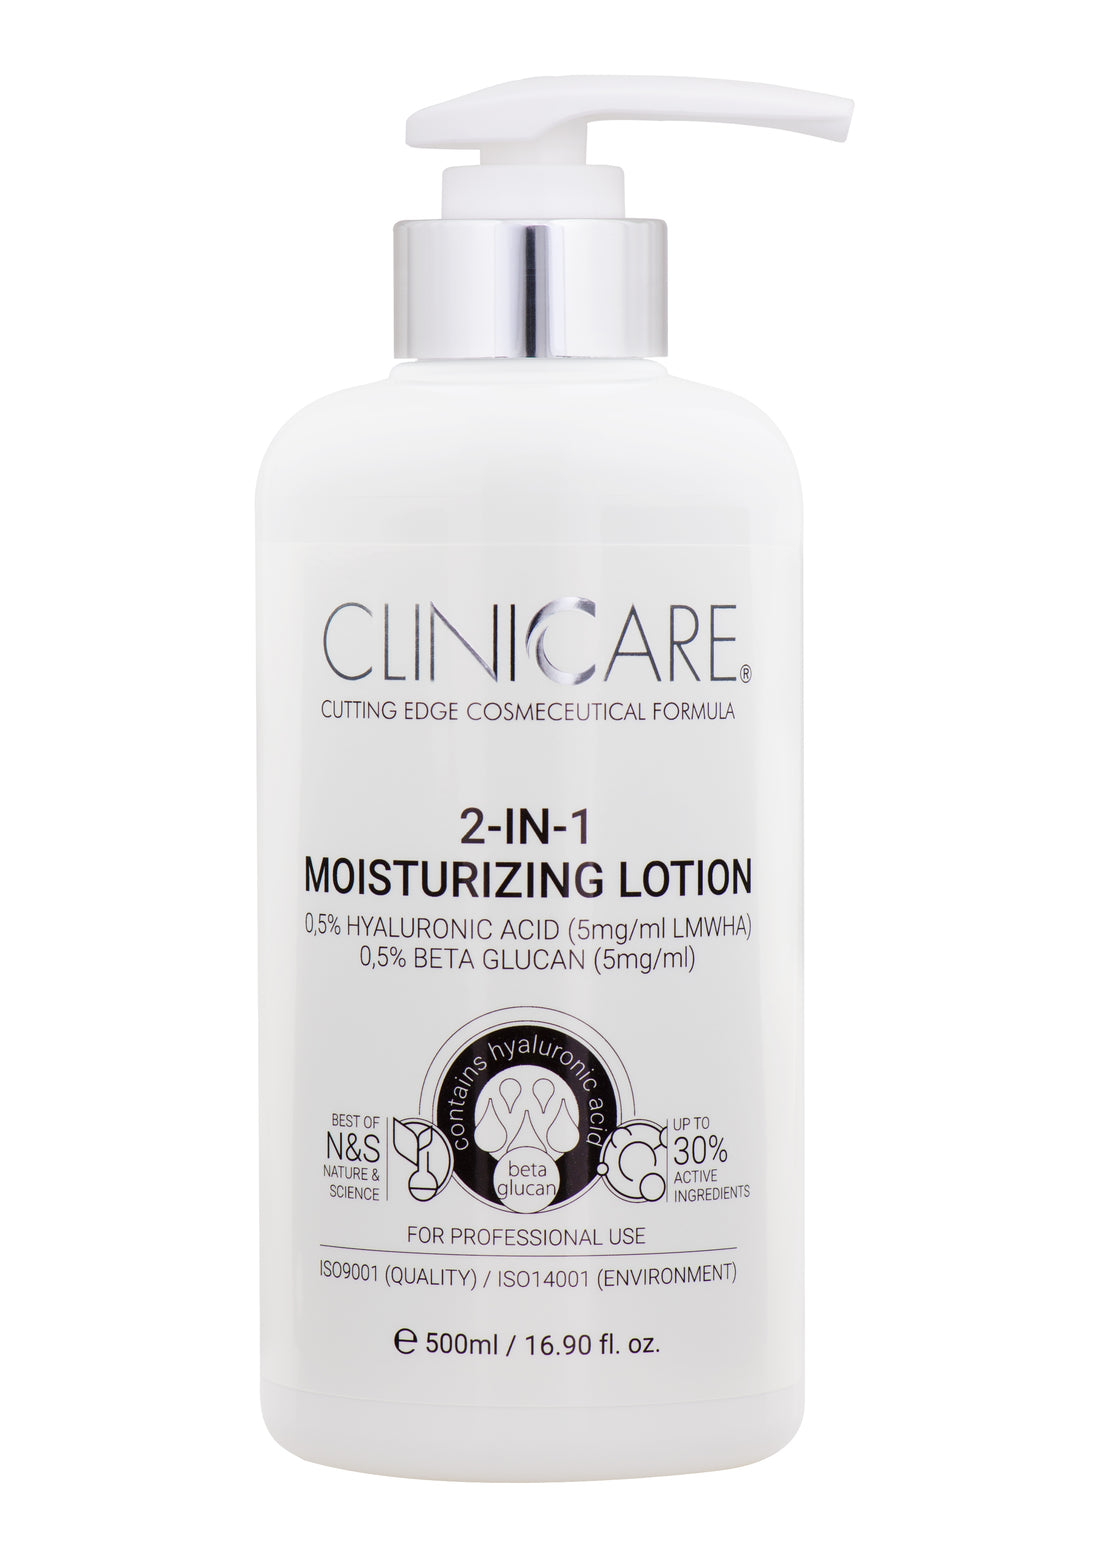 2-IN-1 MOISTURIZING LOTION 500ml - CLINICCARE USA